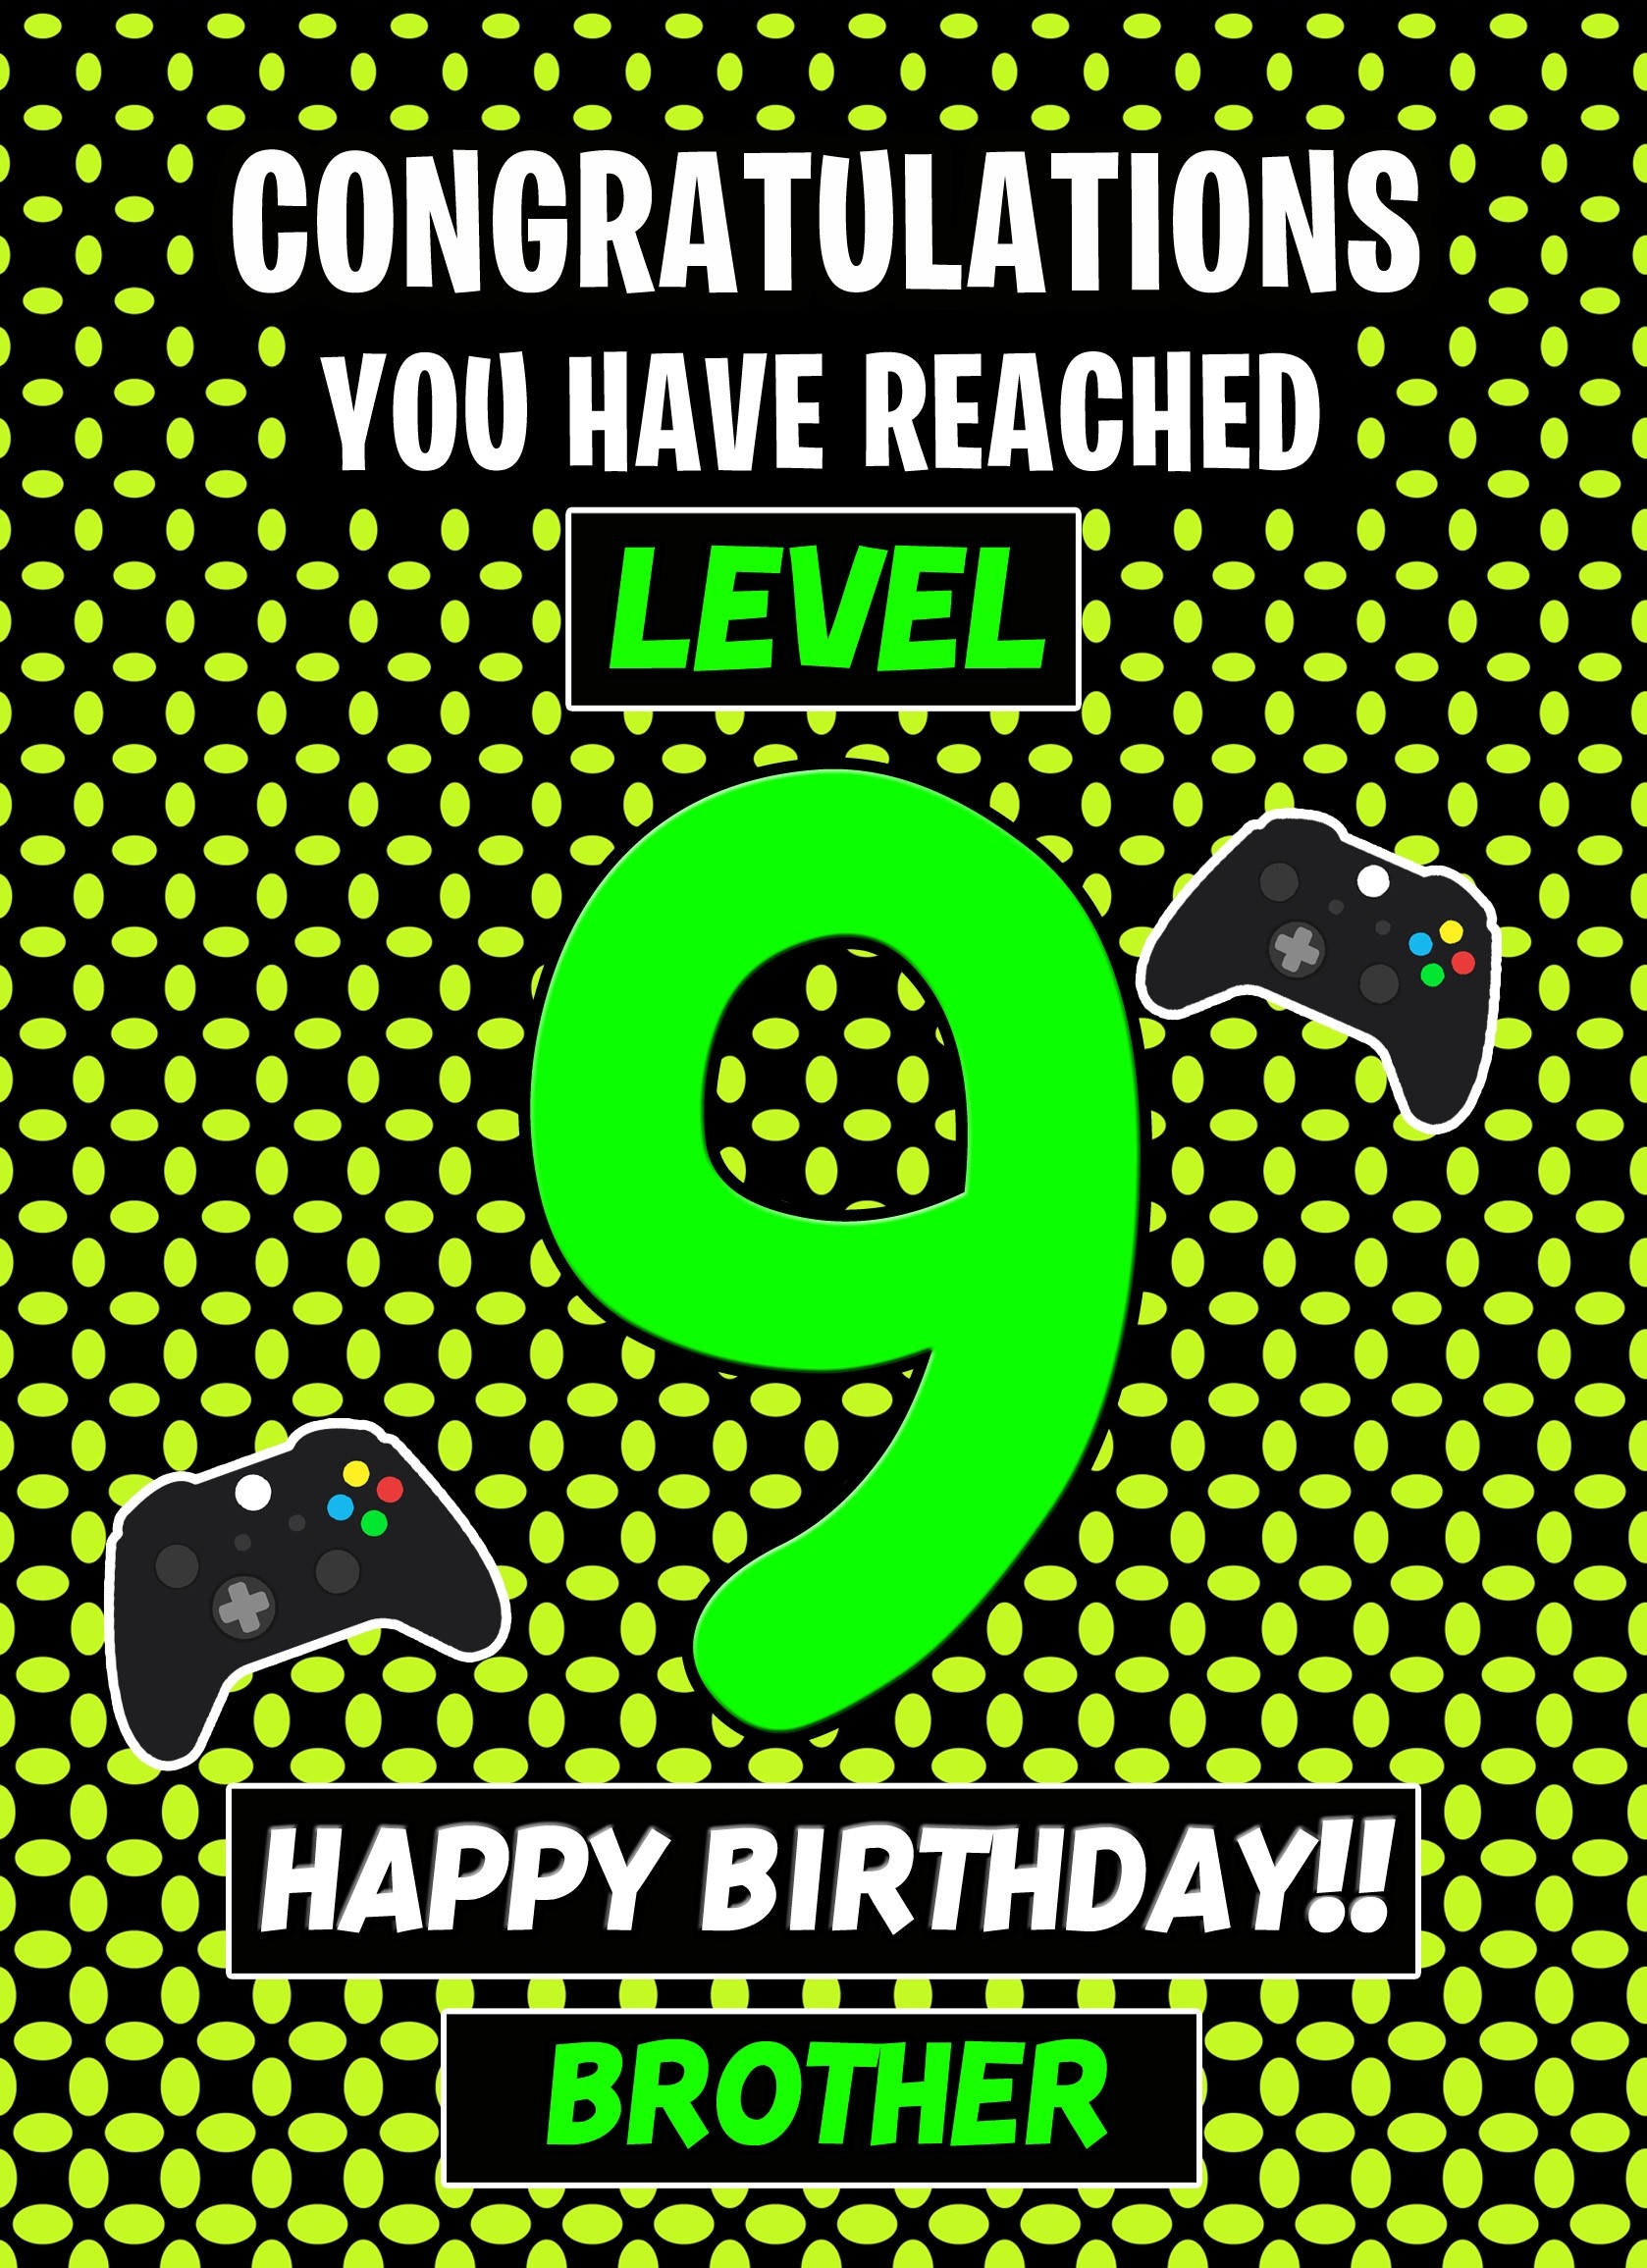 Brother 9th Birthday Card (Level Up Gamer)